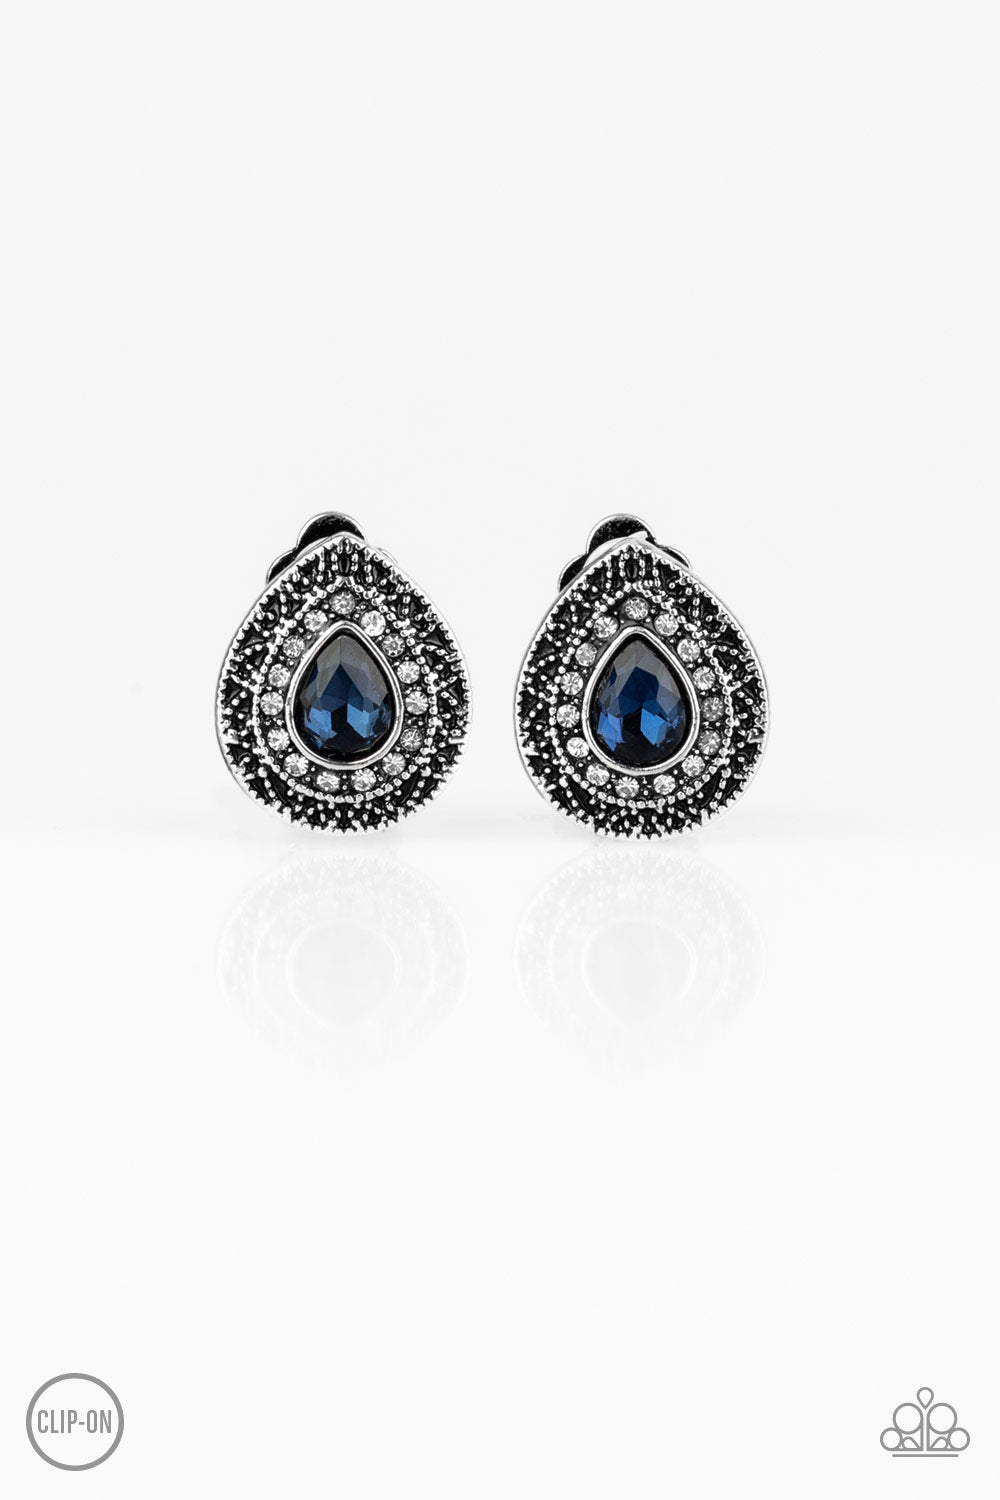 High Class Celebrity - blue - Paparazzi CLIP ON earrings